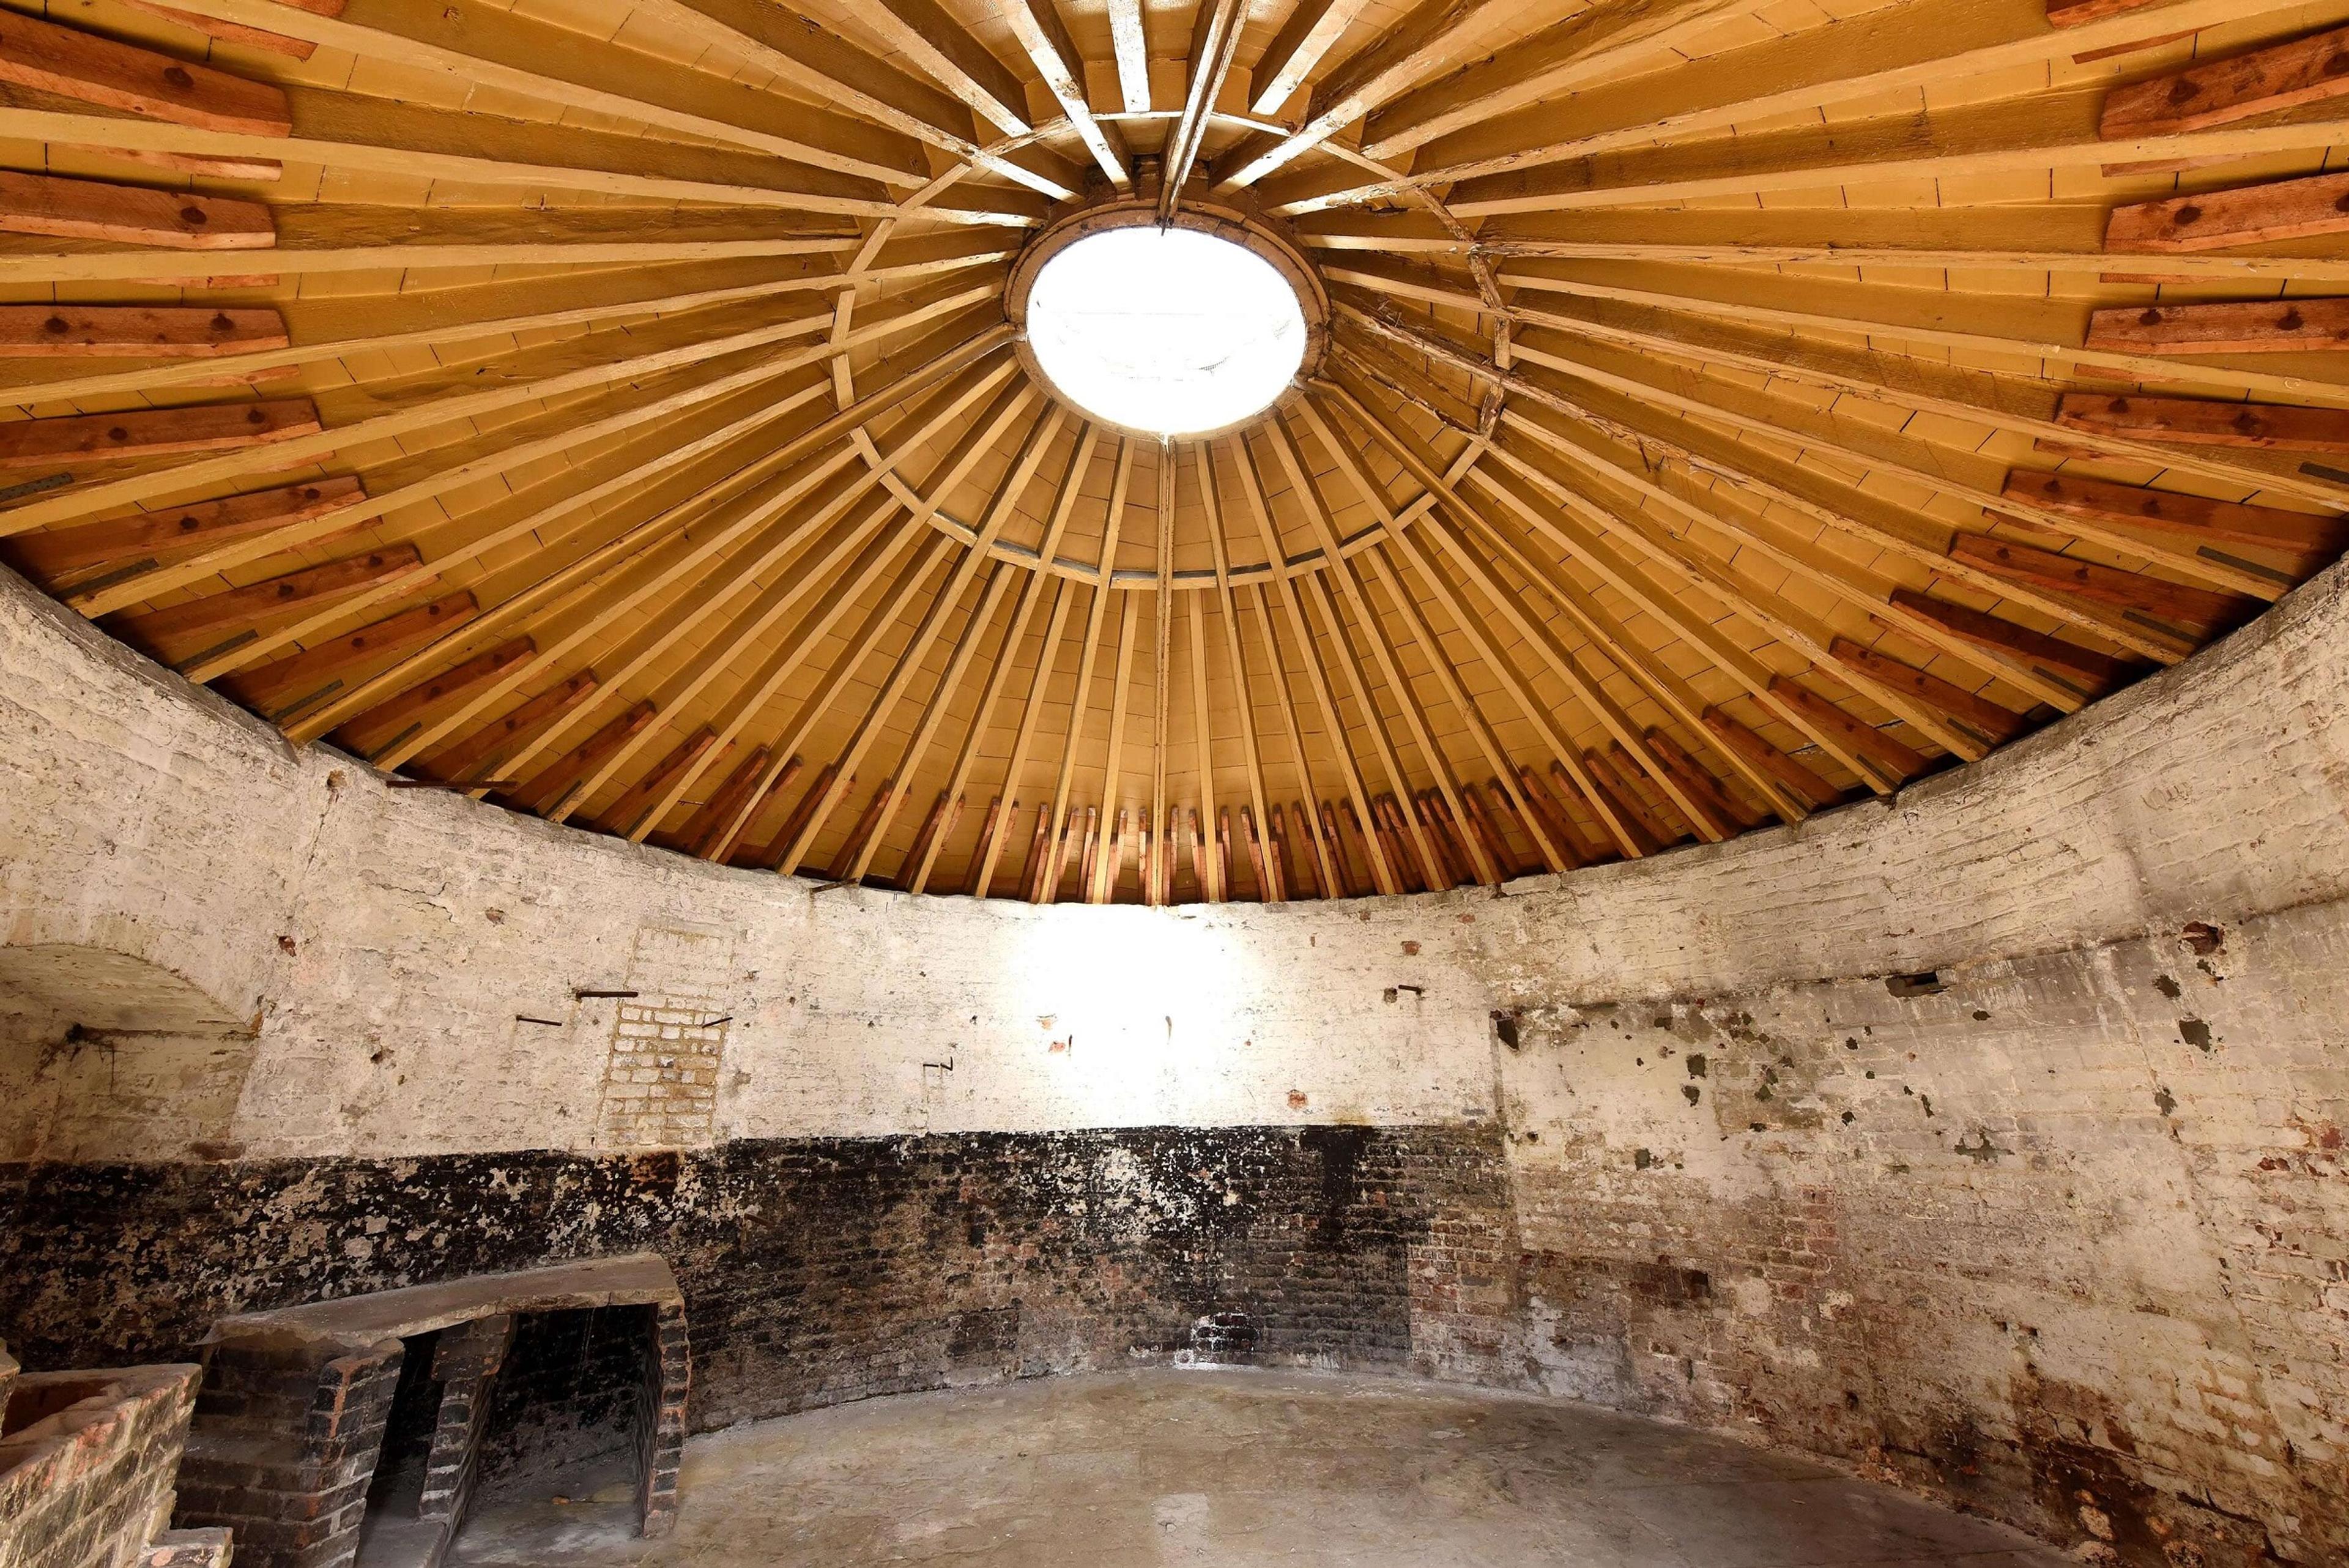 Interior of a one-storey round brick building with a wooden roof with a lantern in the centre